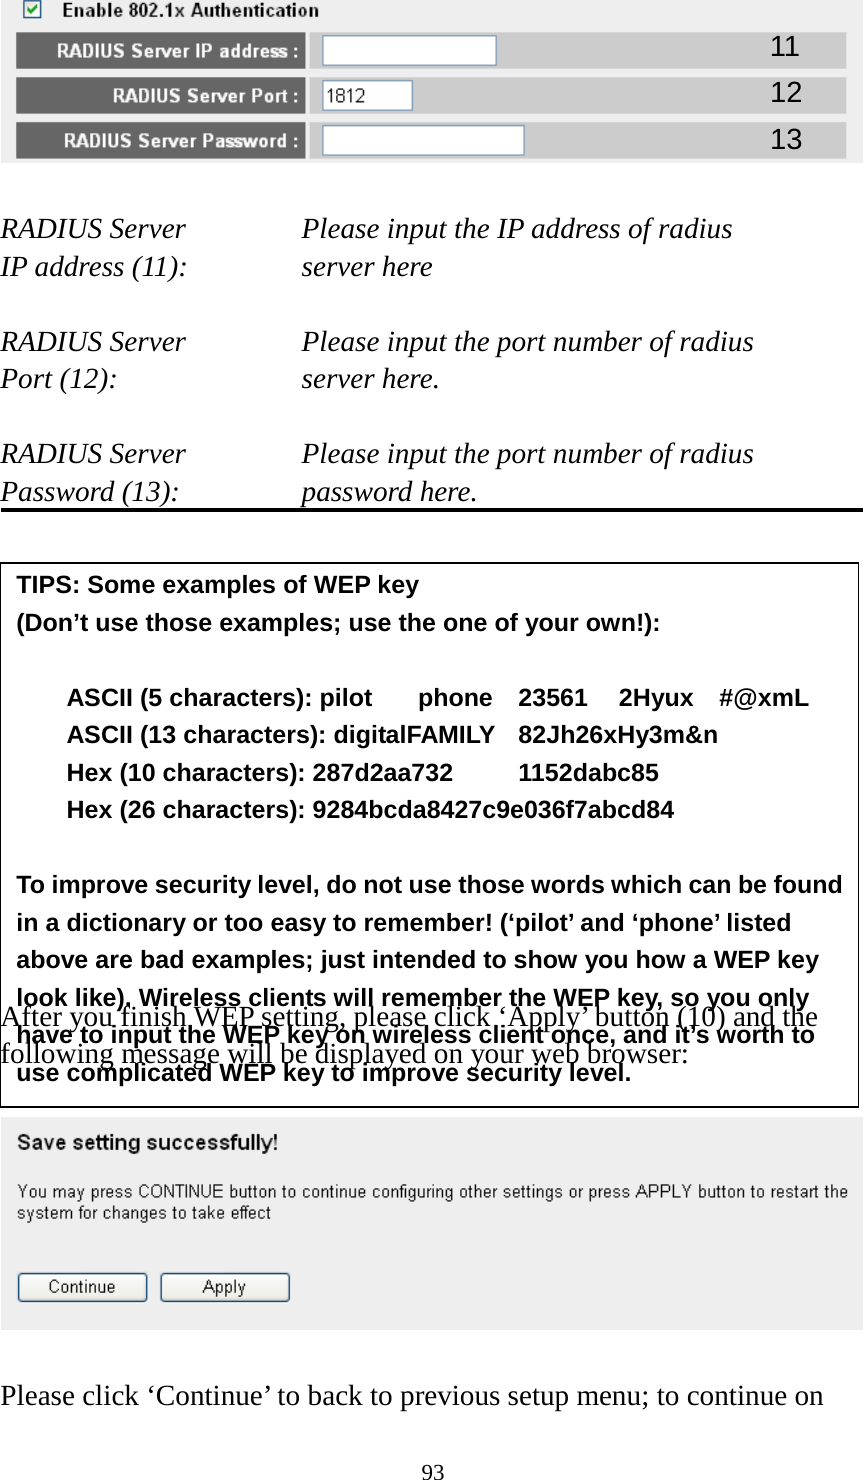 93   RADIUS Server   Please input the IP address of radius   IP address (11):   server here  RADIUS Server   Please input the port number of radius Port (12):        server here.  RADIUS Server   Please input the port number of radius Password (13):   password here.              After you finish WEP setting, please click ‘Apply’ button (10) and the following message will be displayed on your web browser:    Please click ‘Continue’ to back to previous setup menu; to continue on 11 12 13 TIPS: Some examples of WEP key   (Don’t use those examples; use the one of your own!):  ASCII (5 characters): pilot   phone   23561   2Hyux   #@xmL ASCII (13 characters): digitalFAMILY   82Jh26xHy3m&amp;n Hex (10 characters): 287d2aa732    1152dabc85 Hex (26 characters): 9284bcda8427c9e036f7abcd84  To improve security level, do not use those words which can be found in a dictionary or too easy to remember! (‘pilot’ and ‘phone’ listed above are bad examples; just intended to show you how a WEP key look like). Wireless clients will remember the WEP key, so you only have to input the WEP key on wireless client once, and it’s worth to use complicated WEP key to improve security level. 